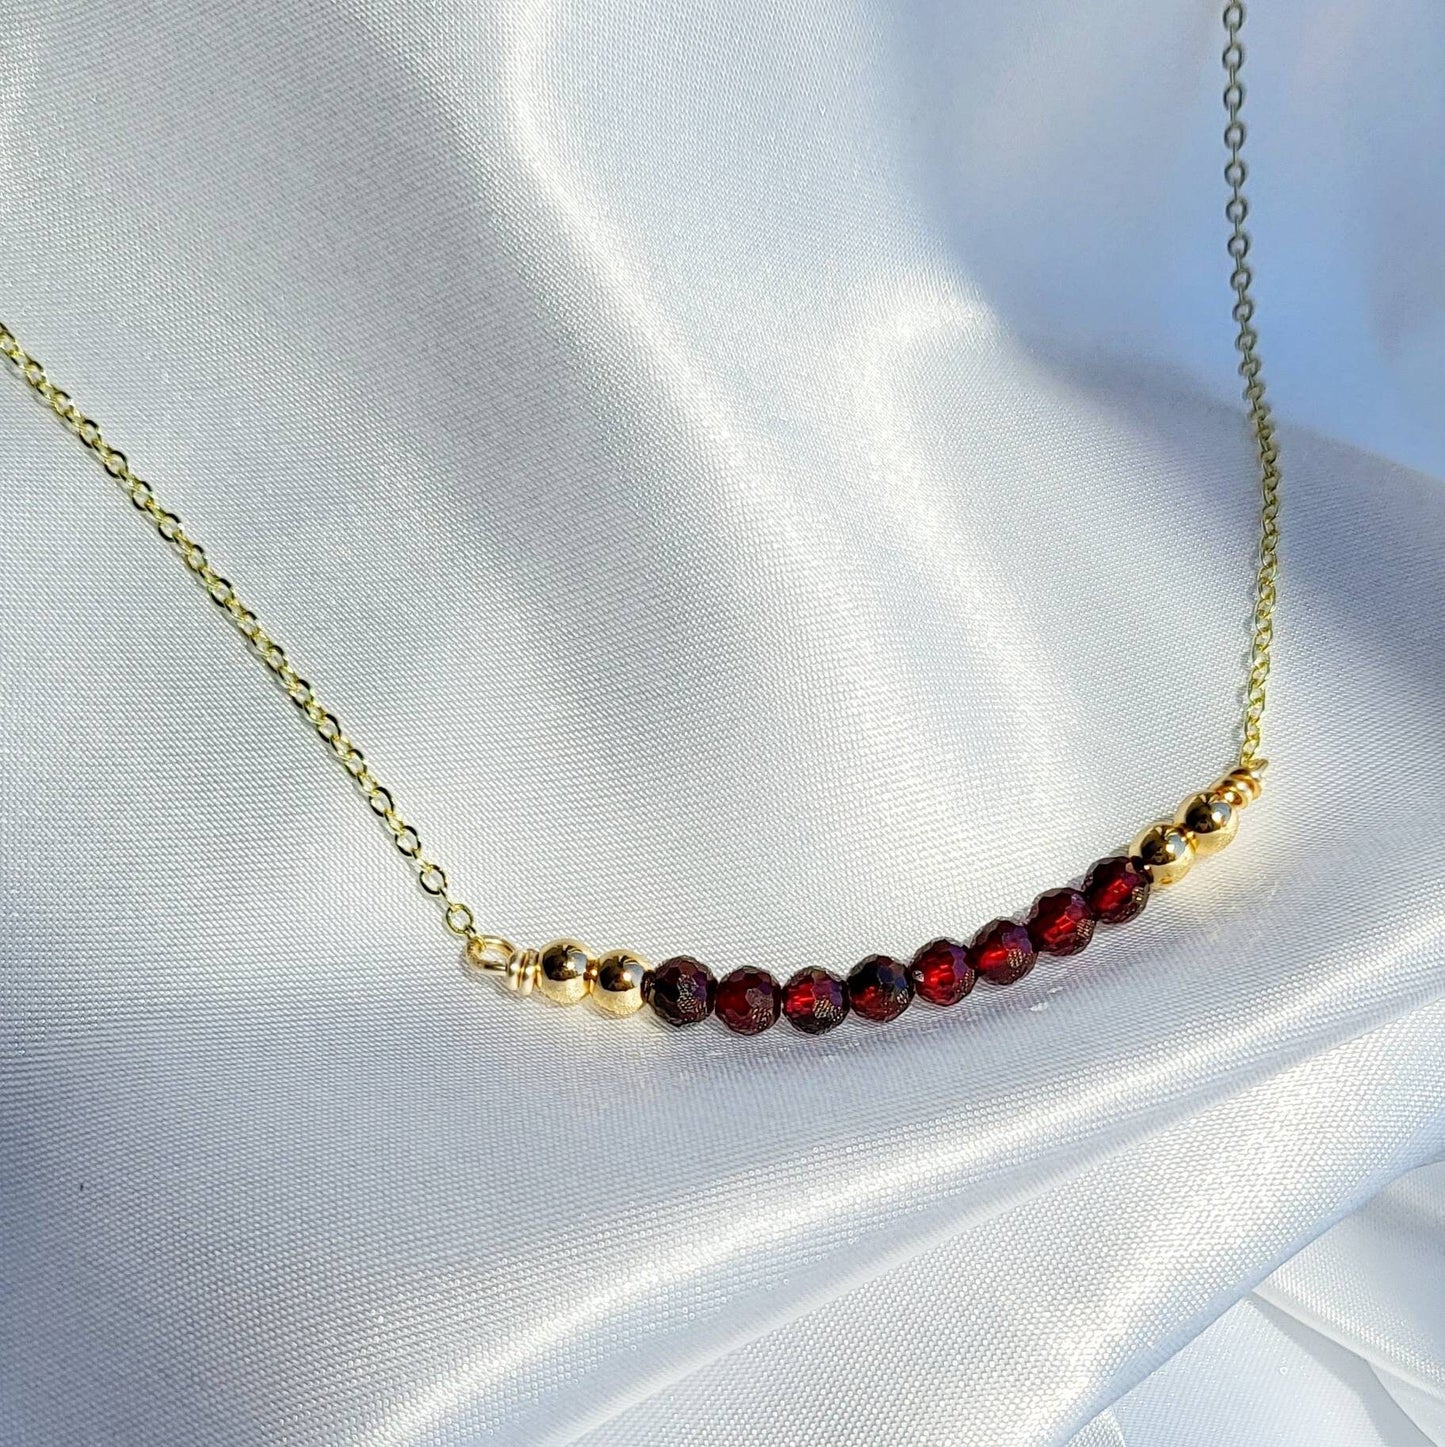 GARNET | 14K Yellow Gold Garnet Crystal Bar Necklace | Red Gemstone Jewelry | Christmas Necklaces | Delicate, Minimalist Necklace